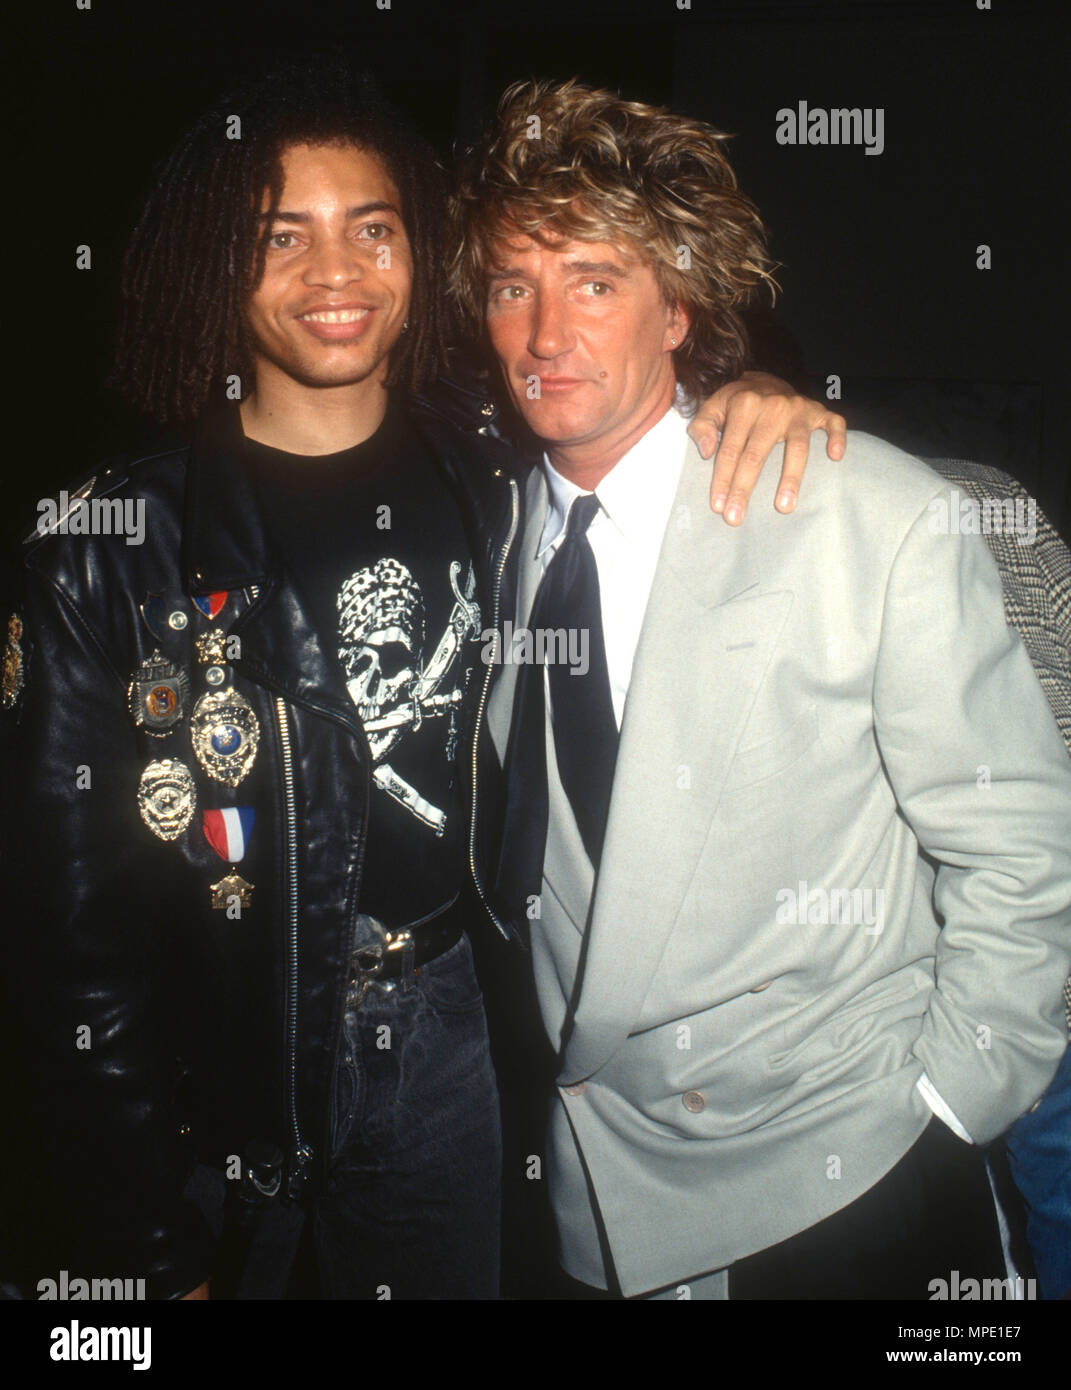 santa-monica-ca-january-31-l-r-singers-terence-trent-darby-and-rod-stewart-attend-pollack-media-groups-eighth-annual-radio-and-music-conference-on-january-31-1991-at-the-museum-of-flying-in-santa-monica-california-photo-by-barry-kingalamy-stock-photo-MPE1E7.jpg